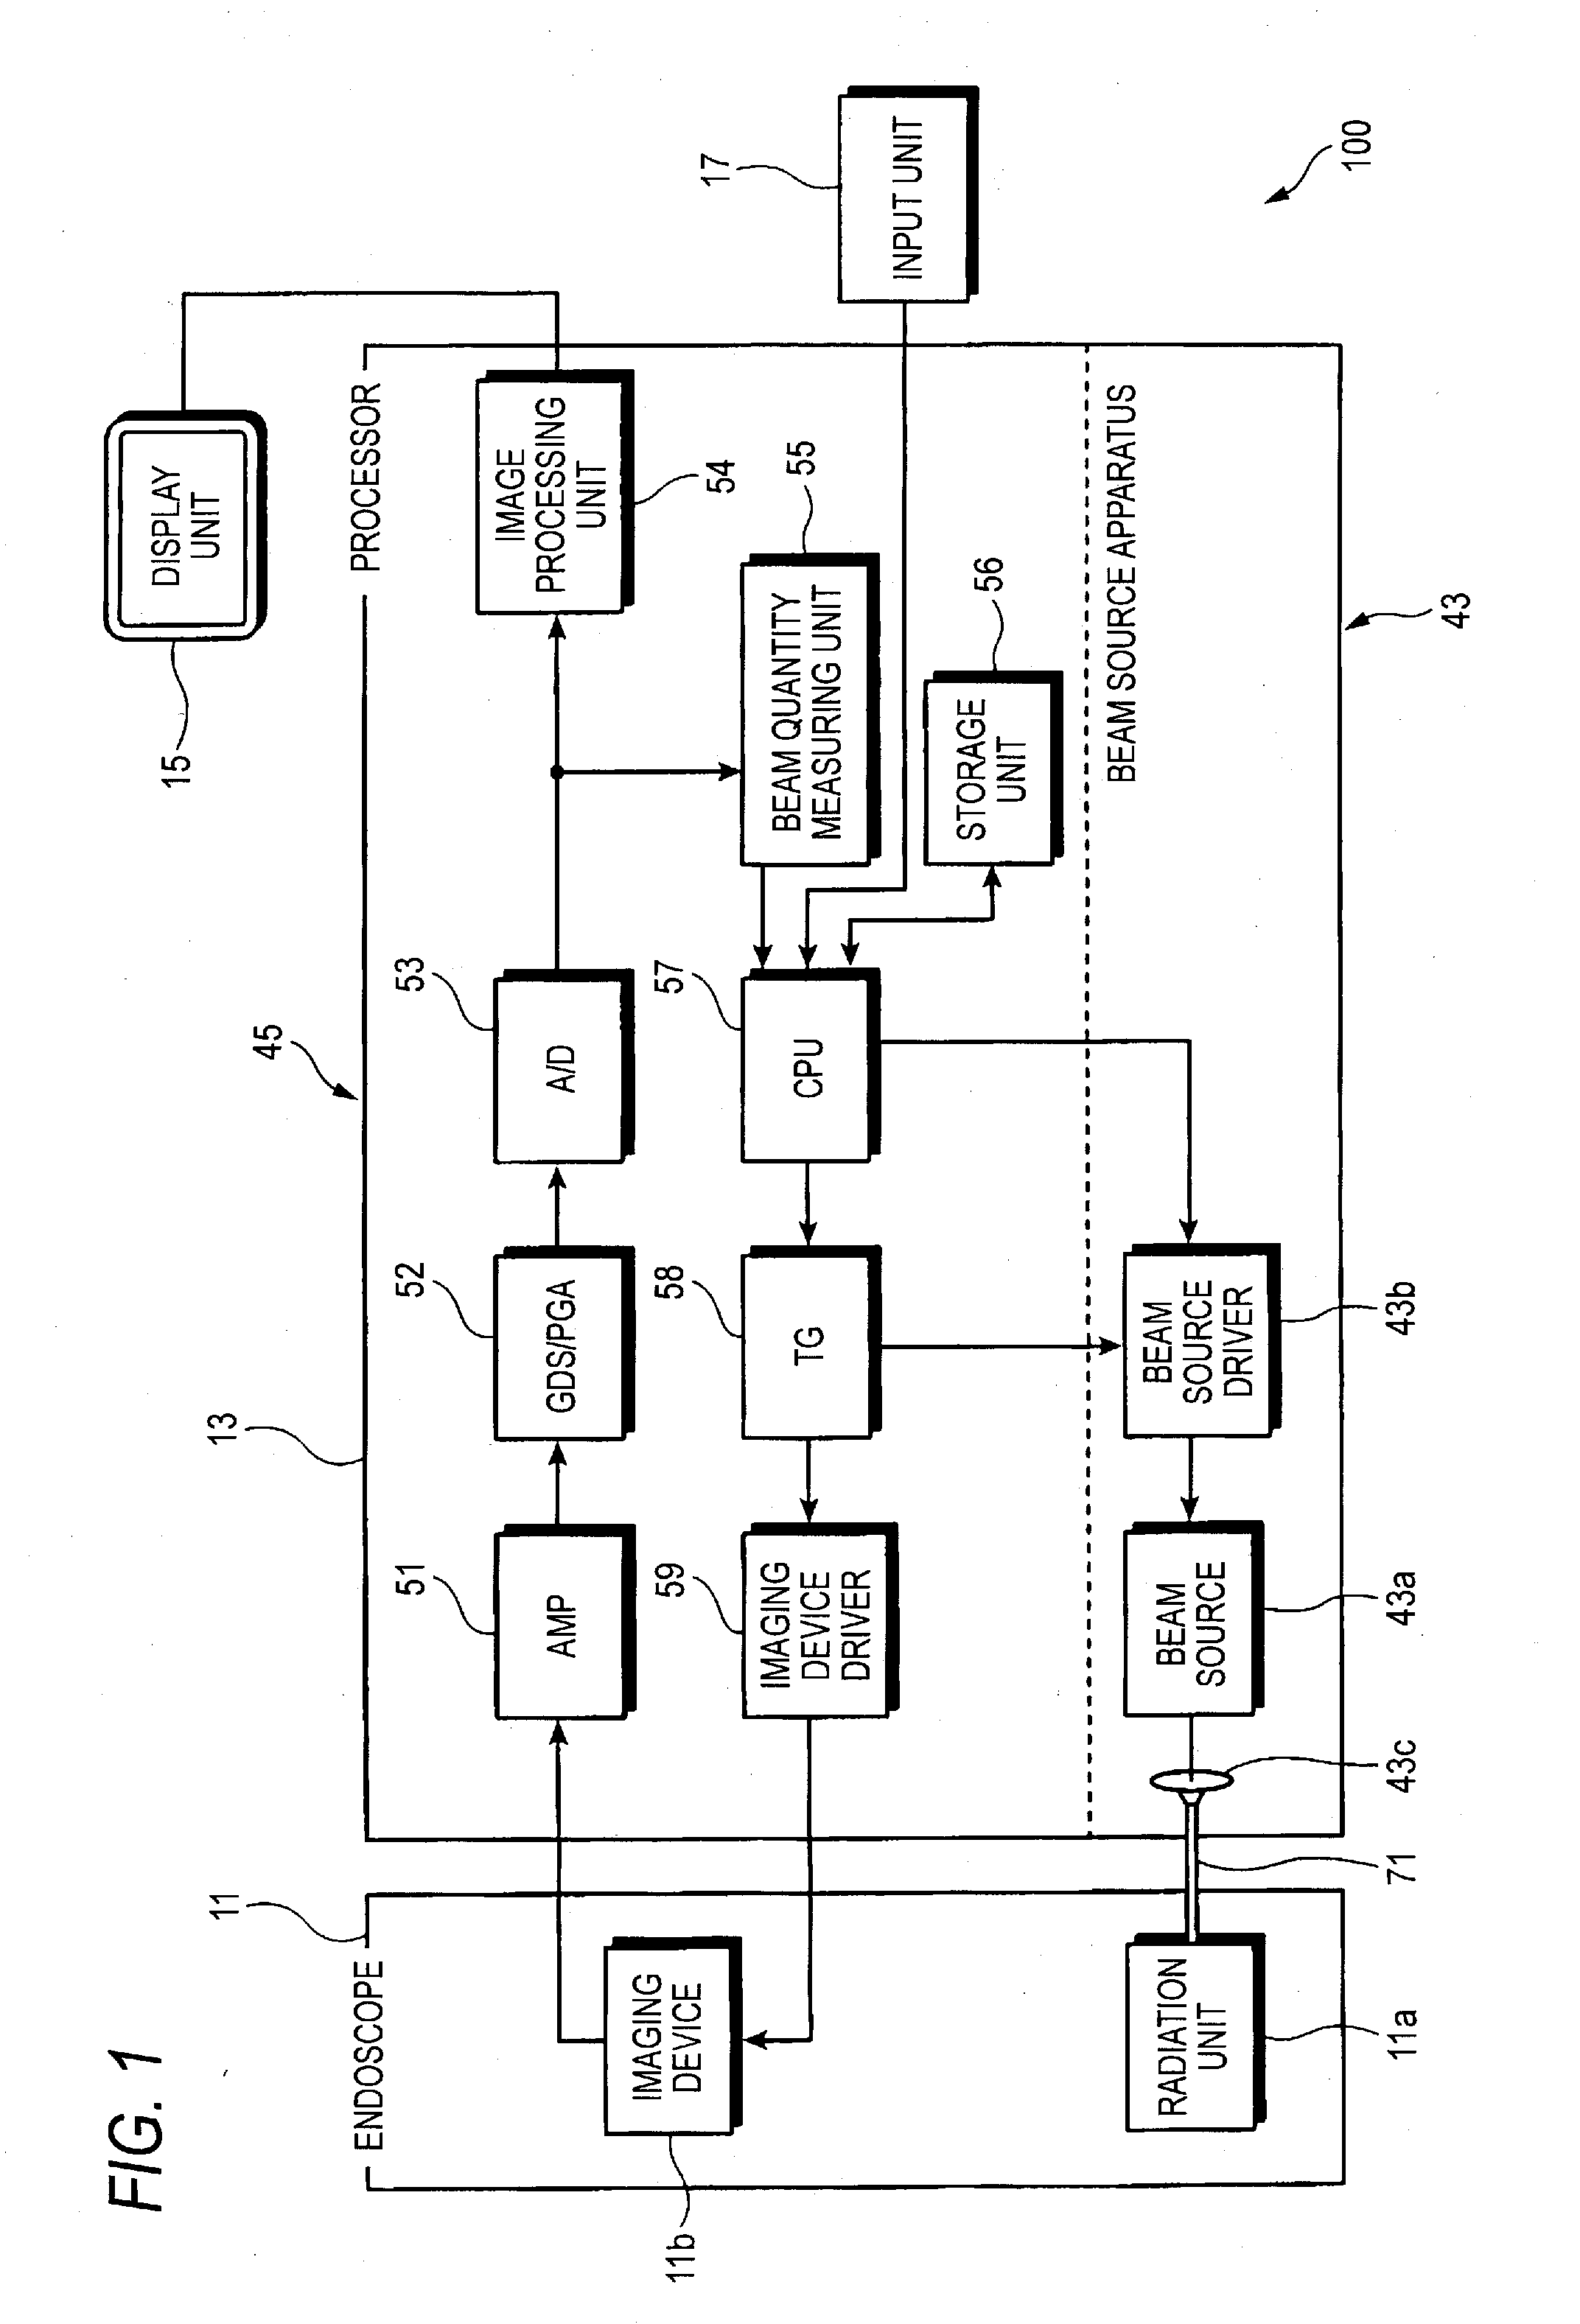 Endoscope beam source apparatus and endoscope system